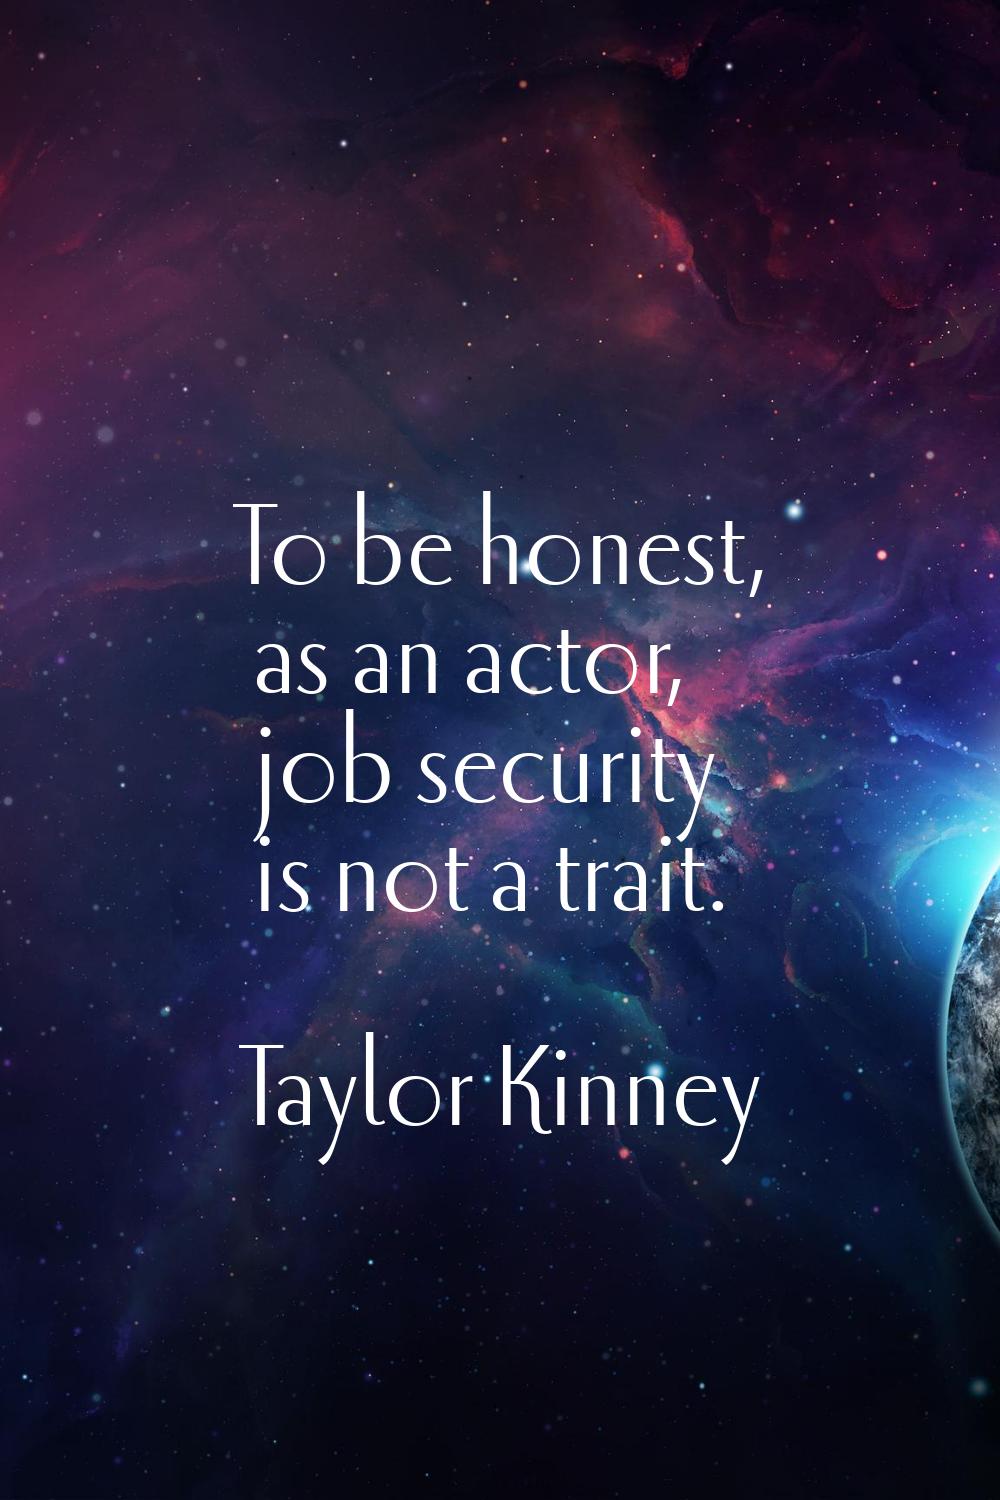 To be honest, as an actor, job security is not a trait.